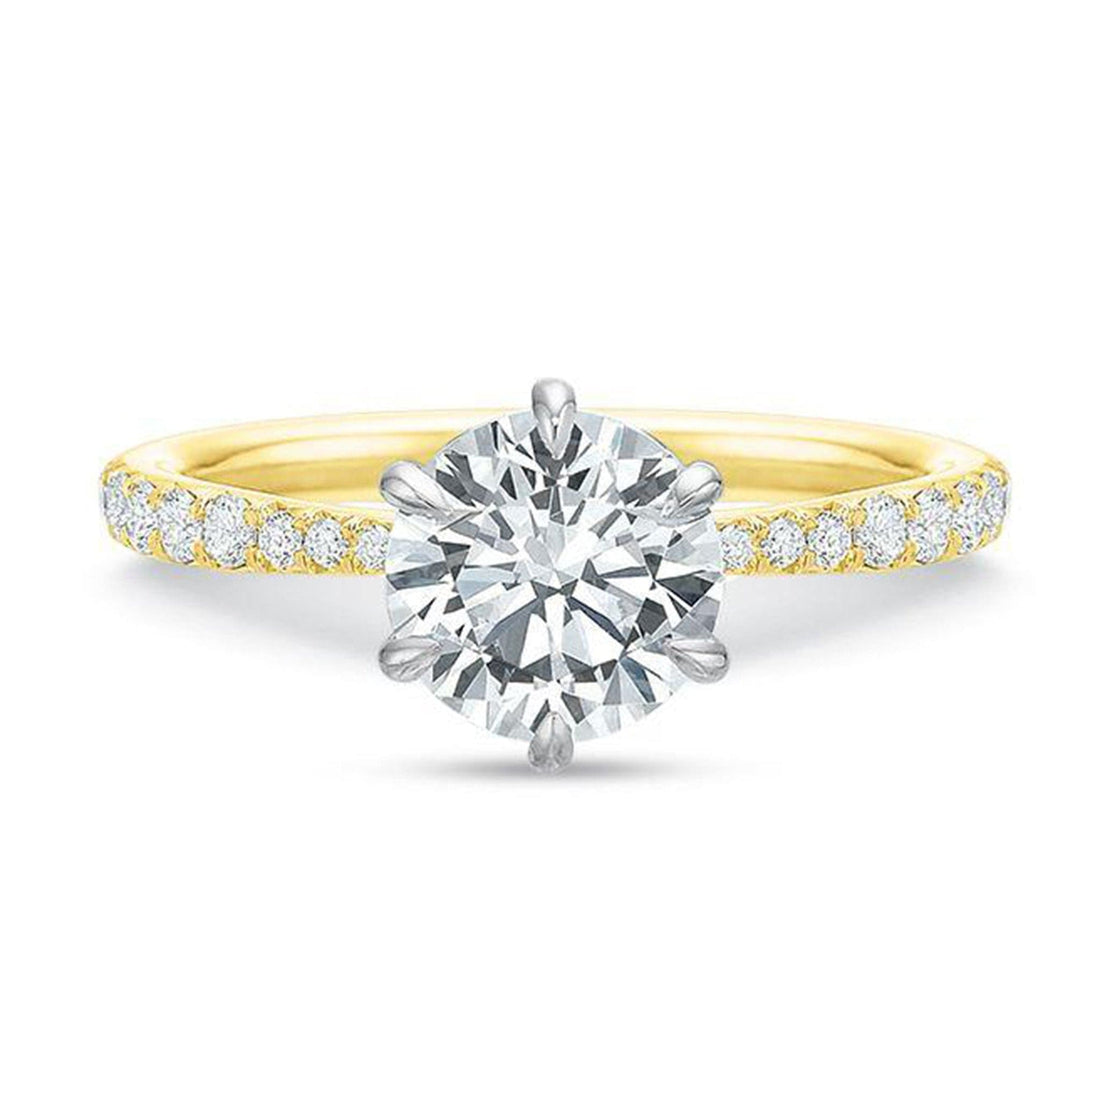 Two-Tone Gold Diamond Sidestone Engagement Ring by Precision Set Front